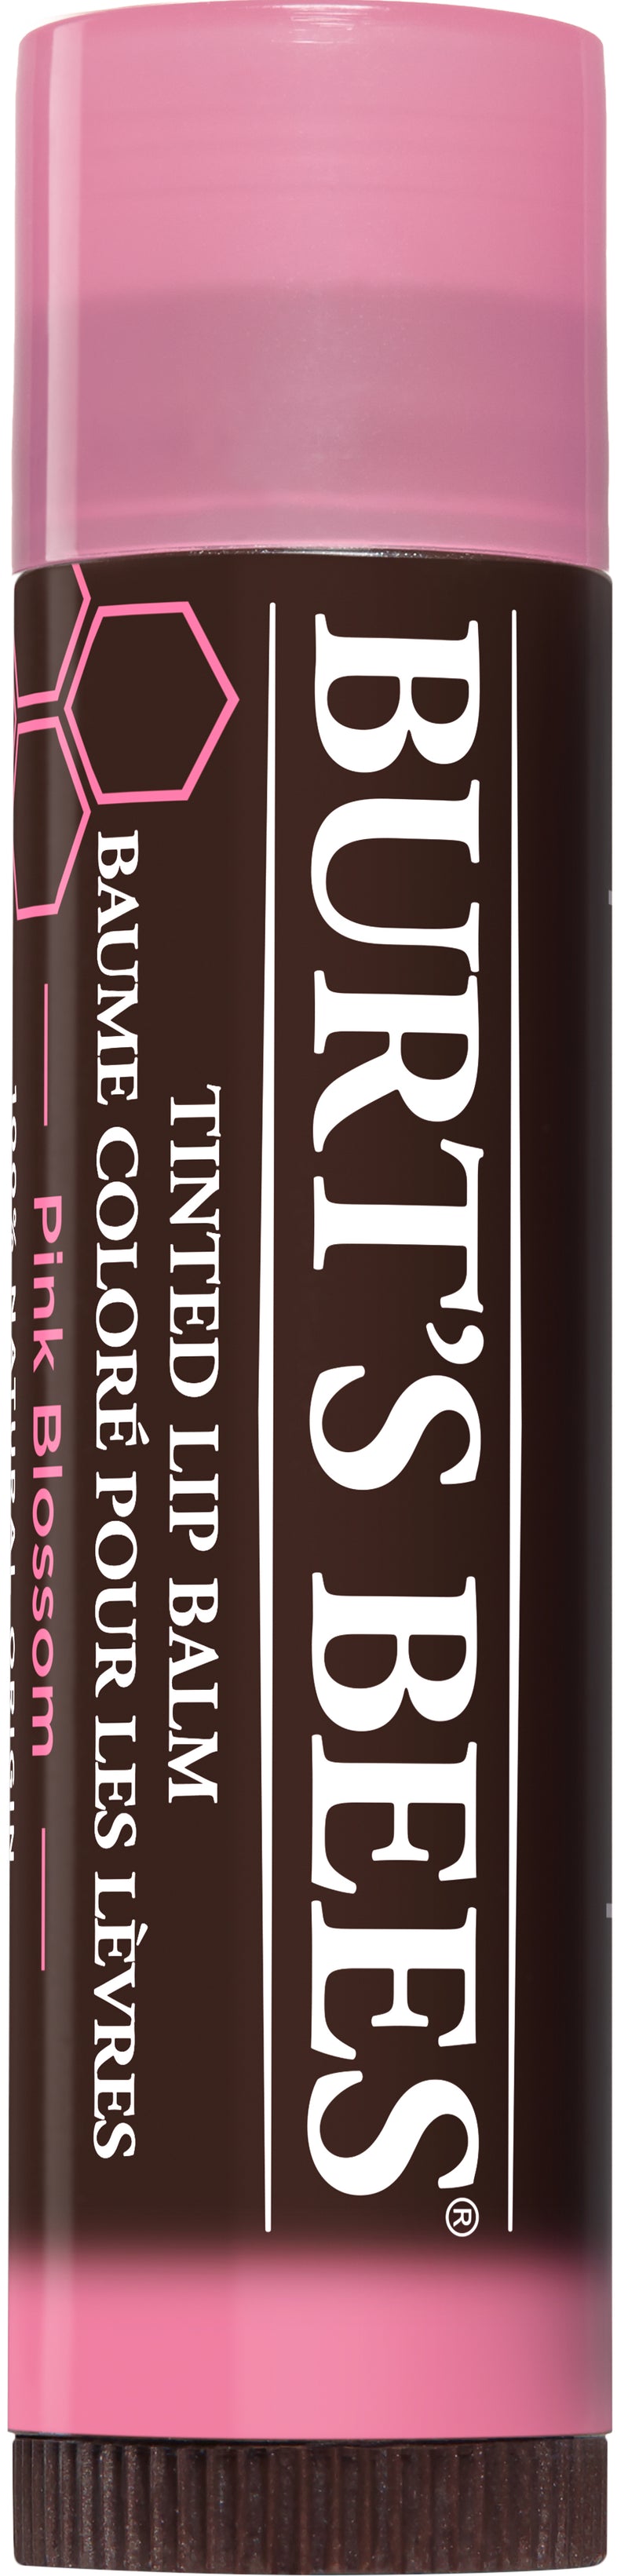 Burts Bees Naturally Tinted Lip Balm in Rose 4.25 g, Skincare